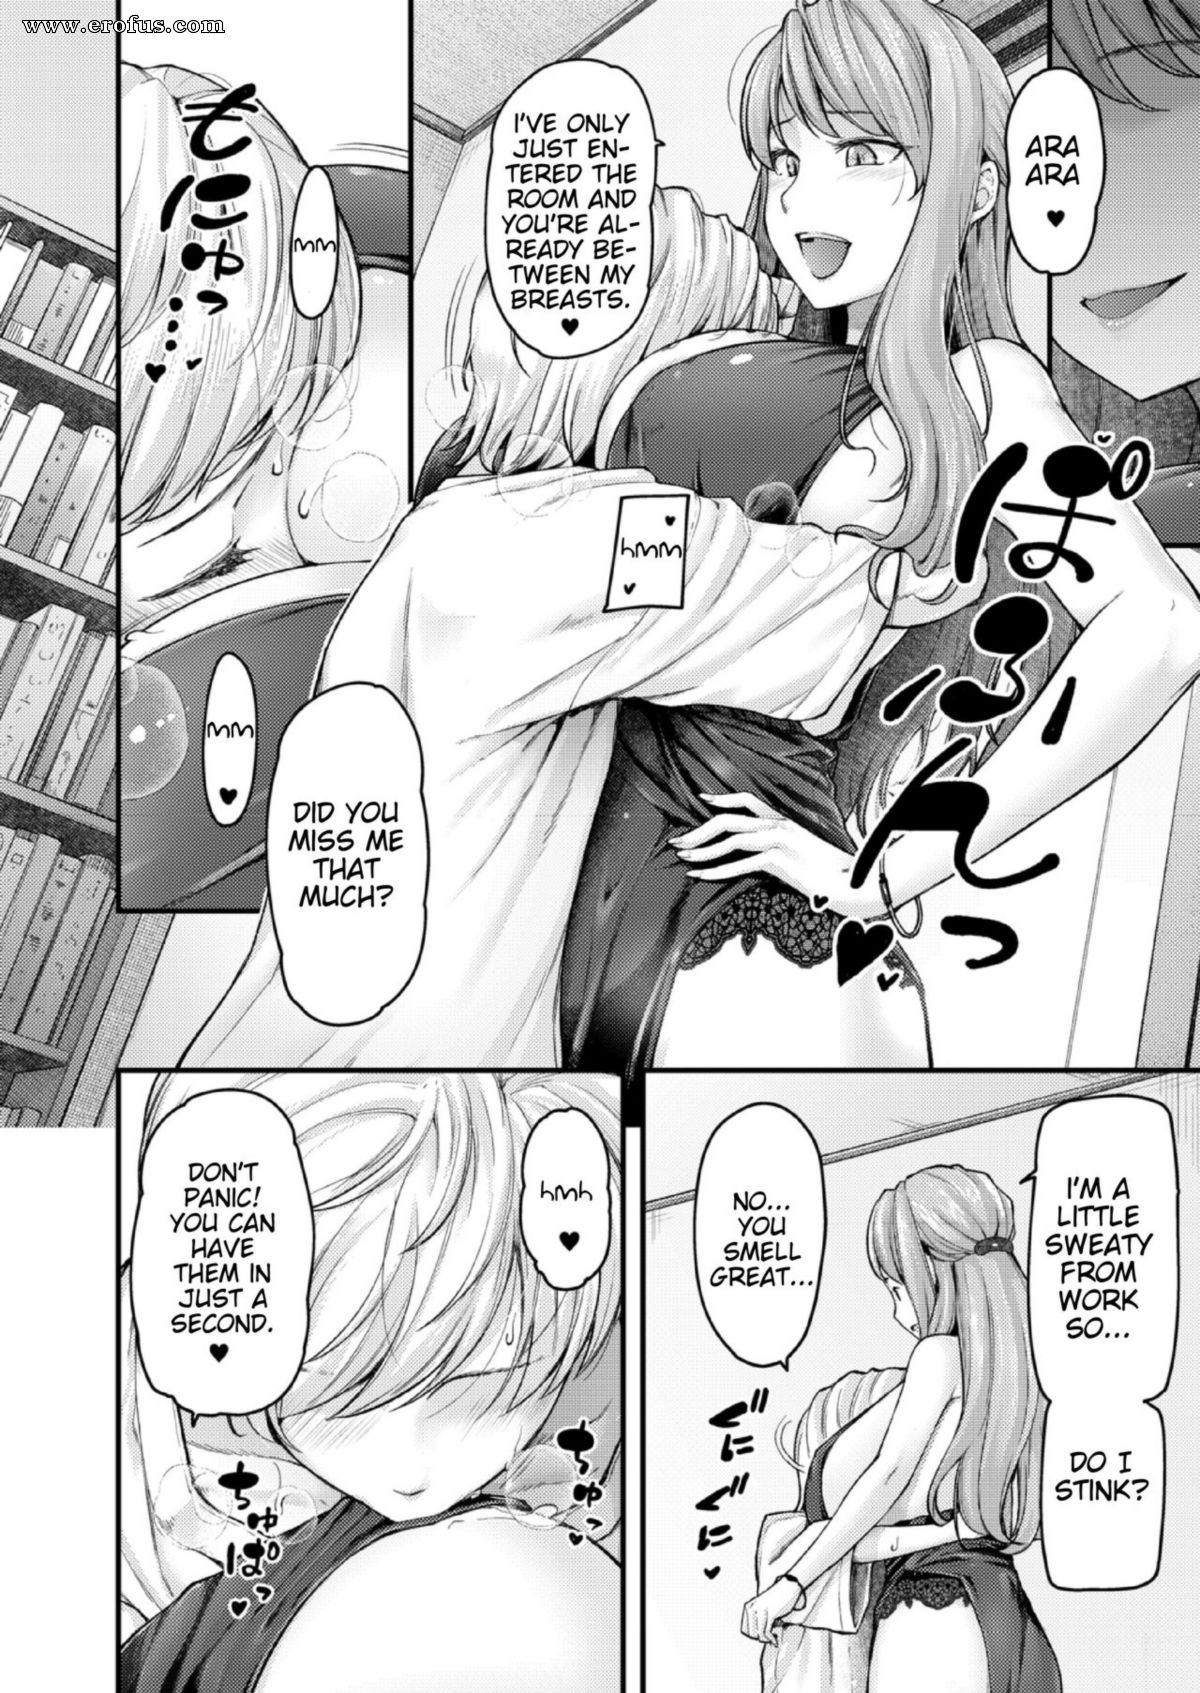 kimplante Mere end noget andet laver mad Page 114 | hentai-and-manga-english/johnny/ill-teach-you-something-nice |  Erofus - Sex and Porn Comics